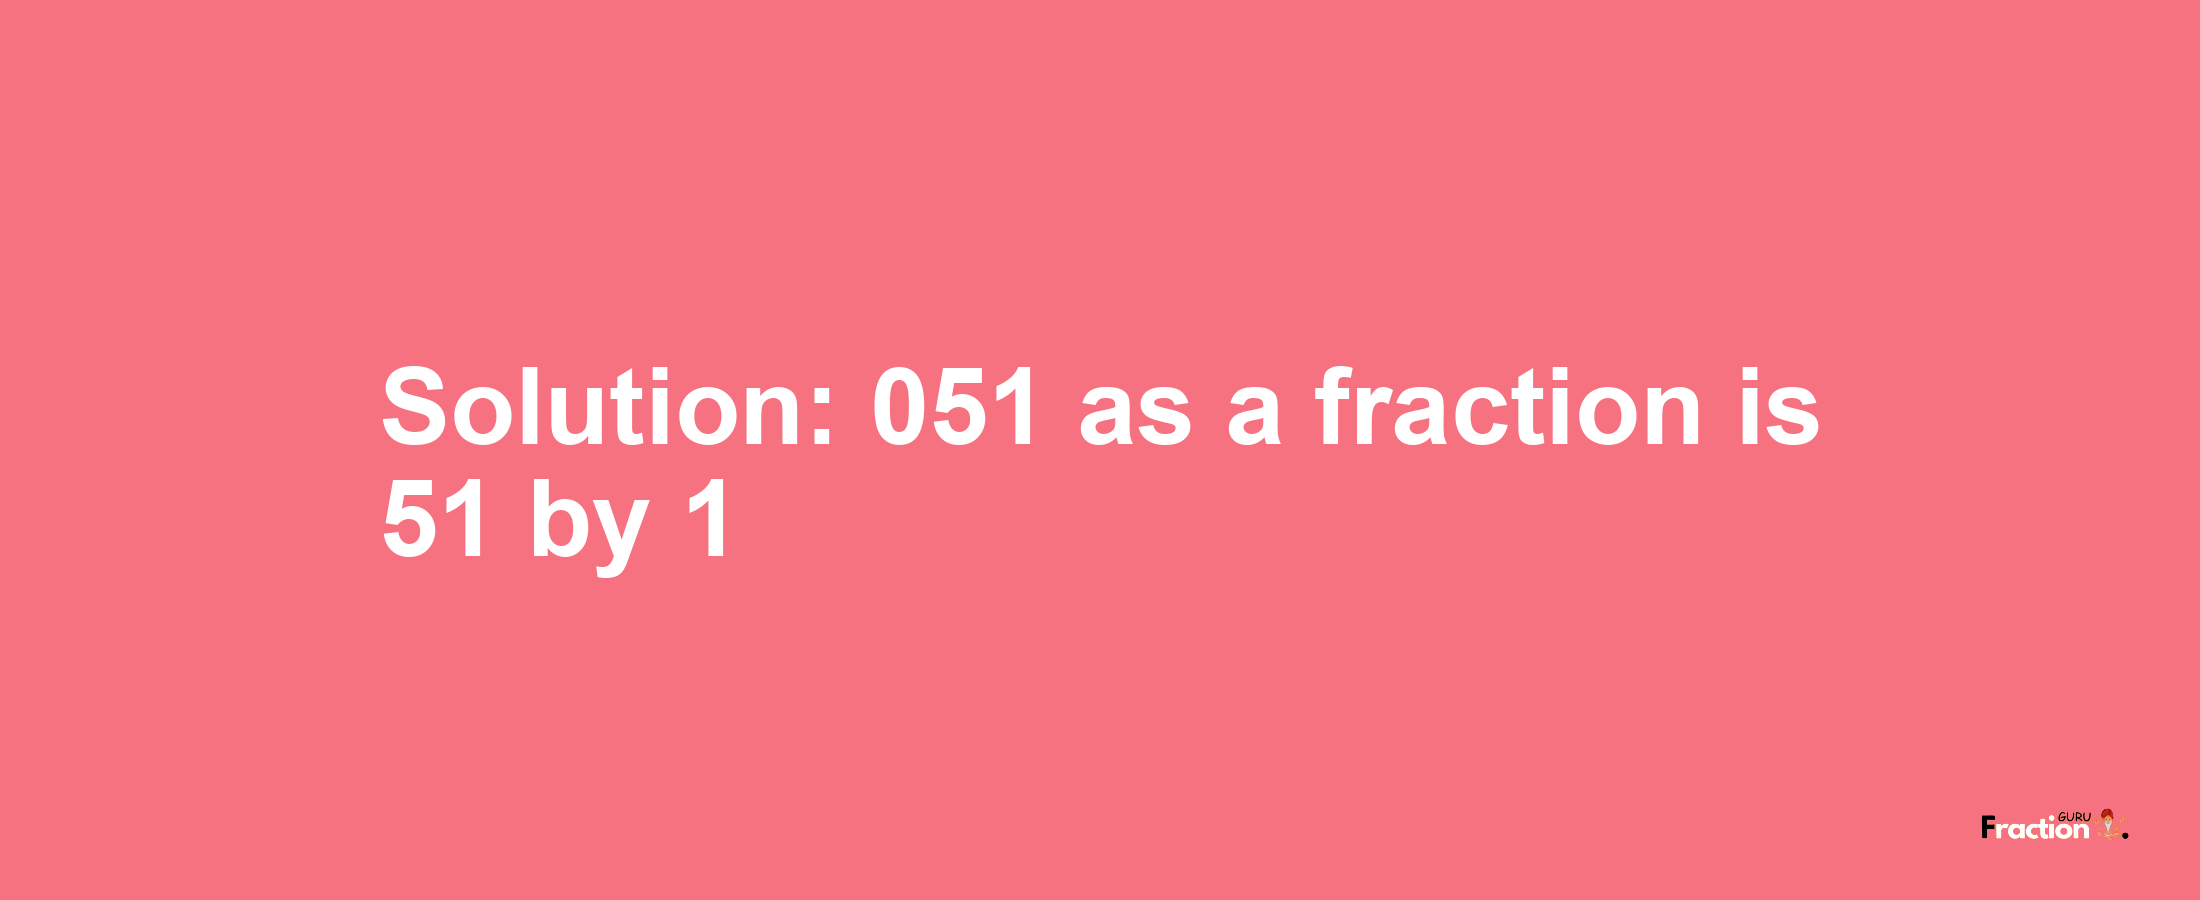 Solution:051 as a fraction is 51/1